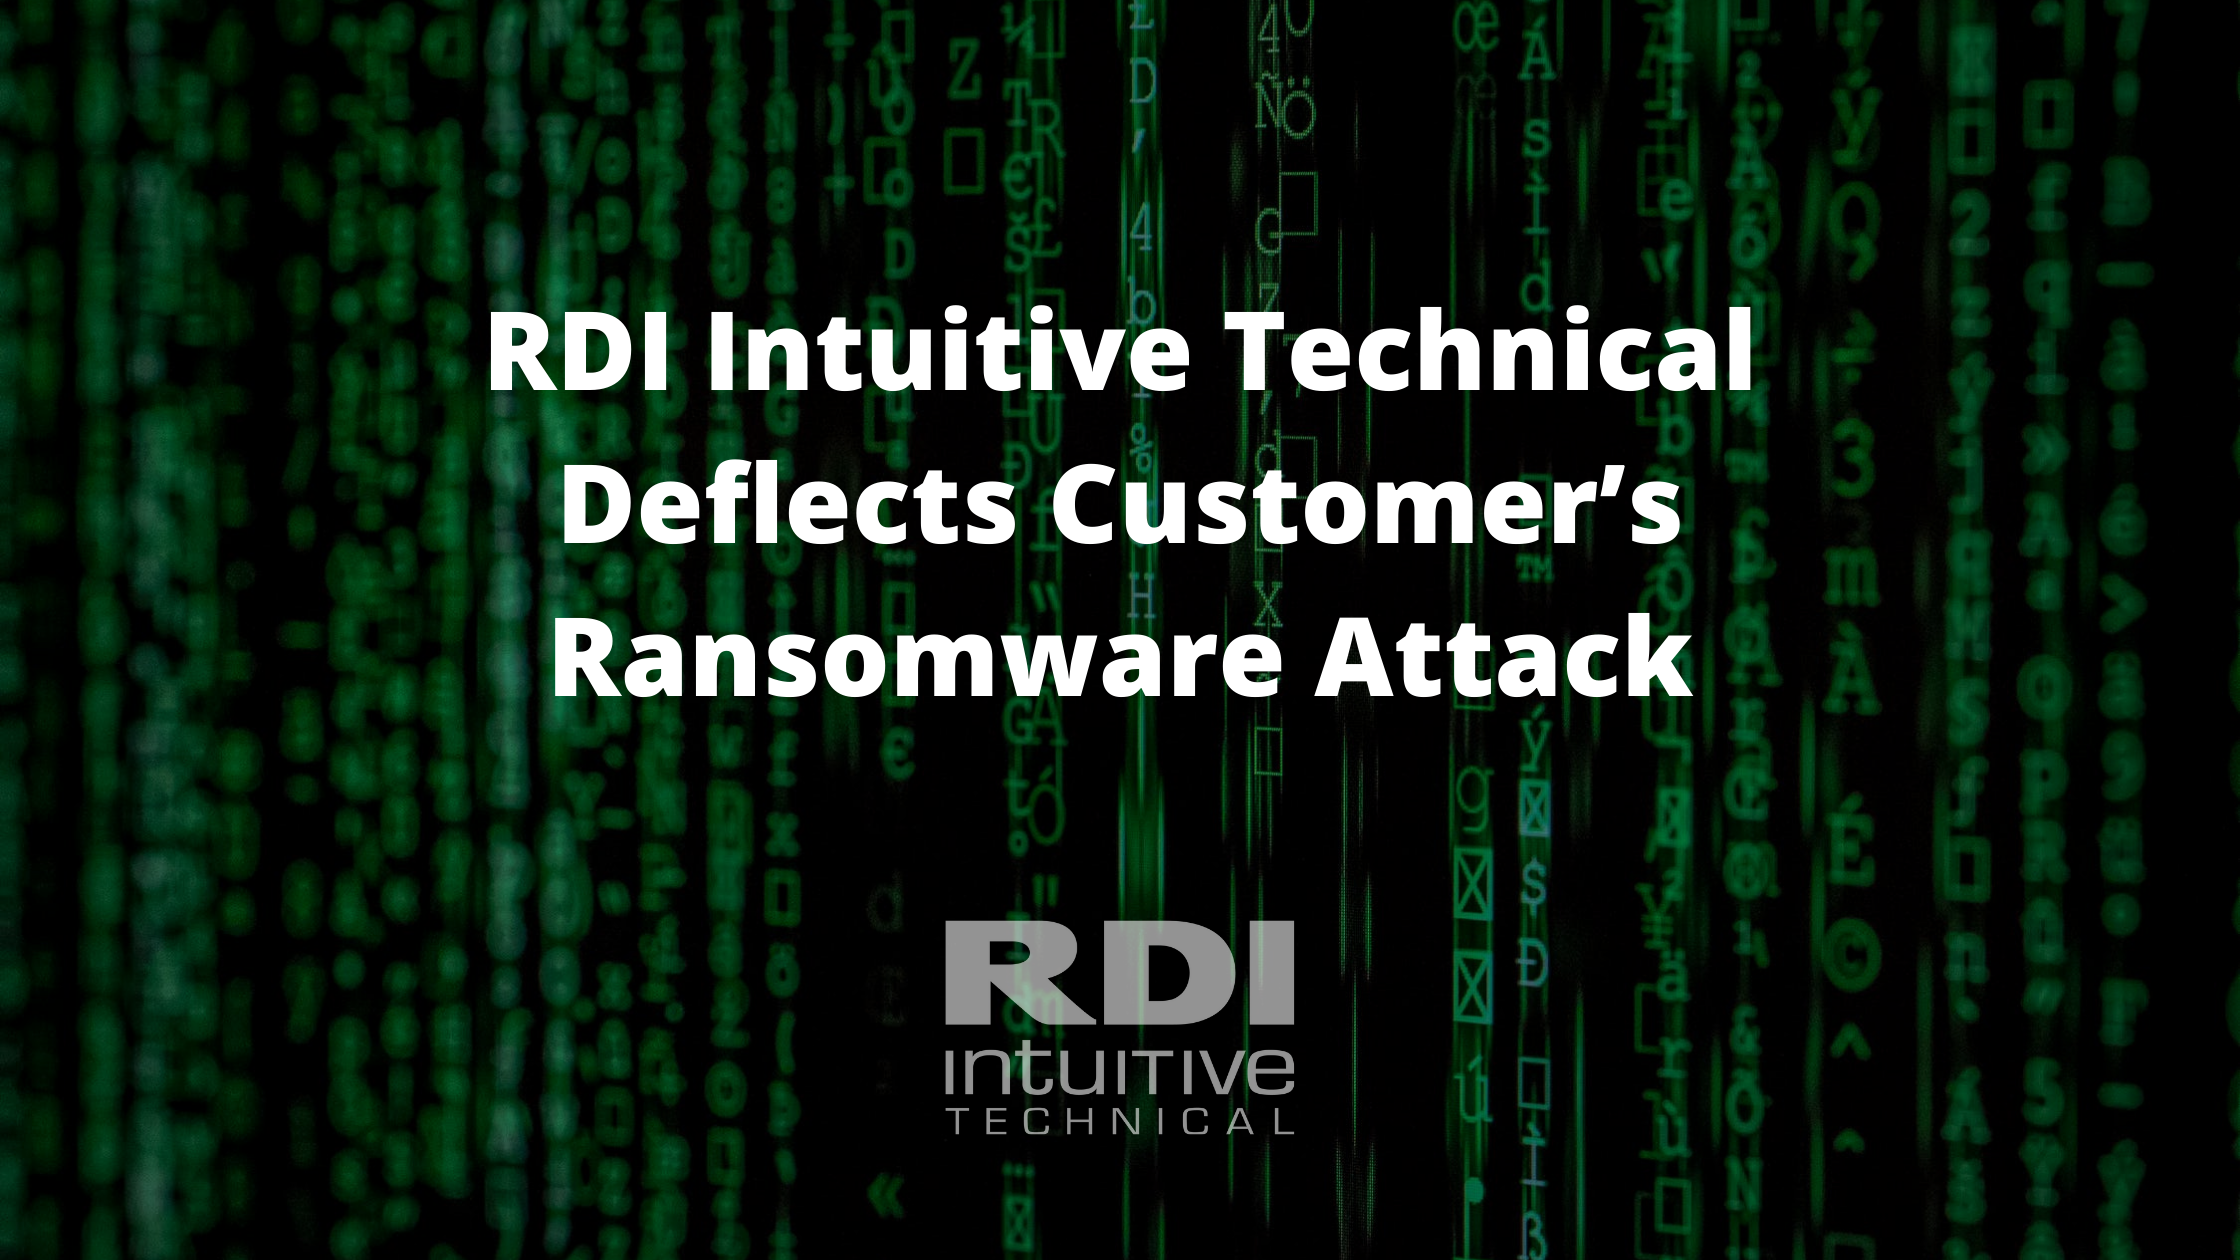 RDI Intuitive Technical Deflects Customer’s Ransomware Attack